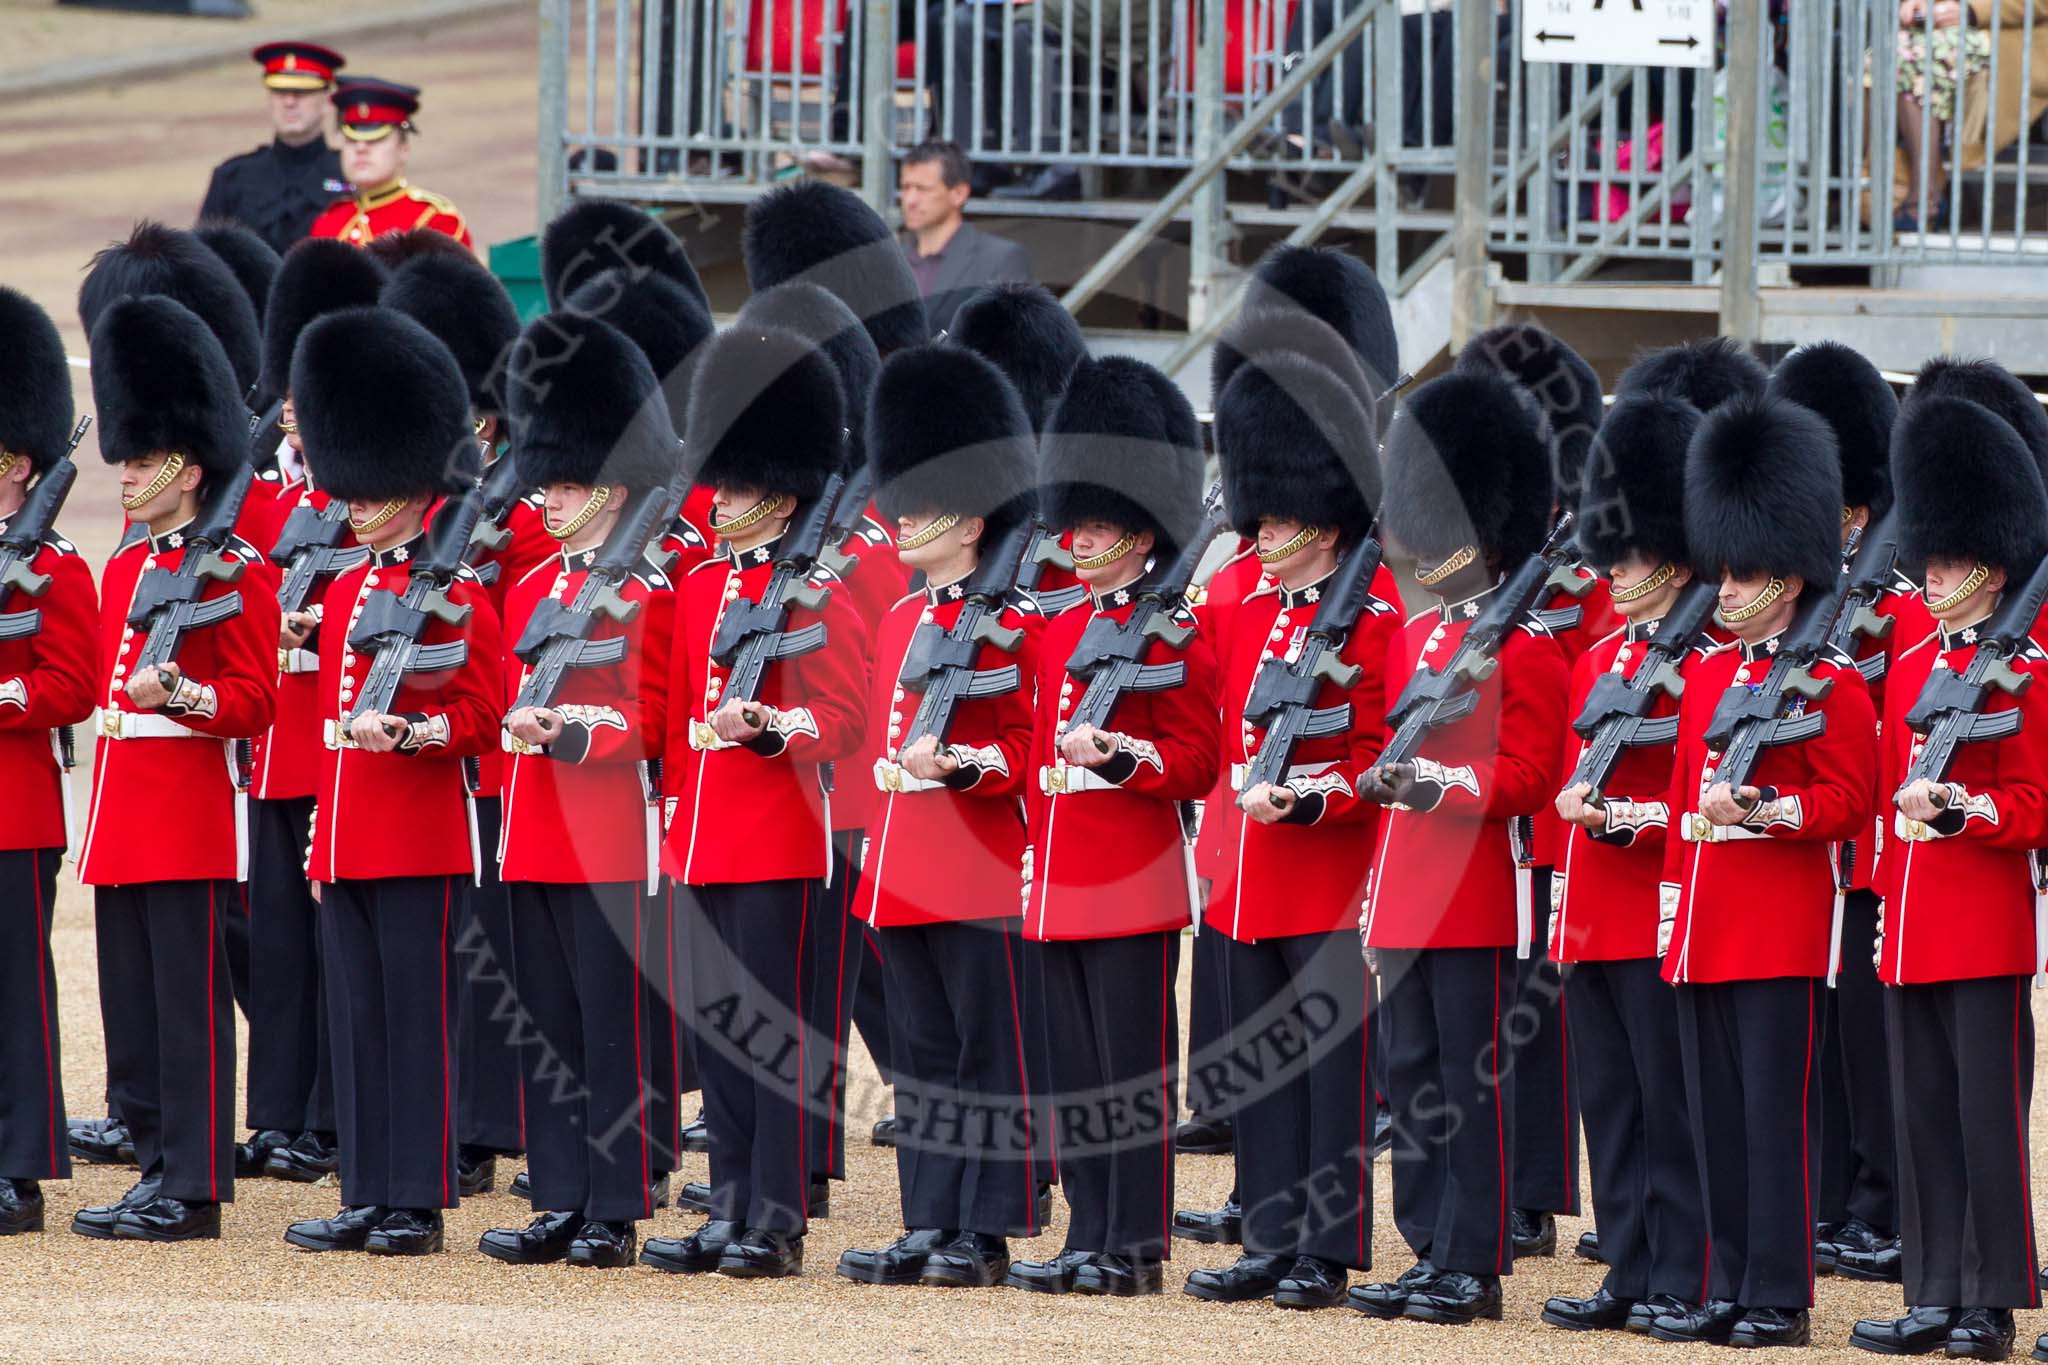 The Major General's Review 2011: No. 6 Guard, No. 7 Company Coldstream Guards..
Horse Guards Parade, Westminster,
London SW1,
Greater London,
United Kingdom,
on 28 May 2011 at 10:36, image #63